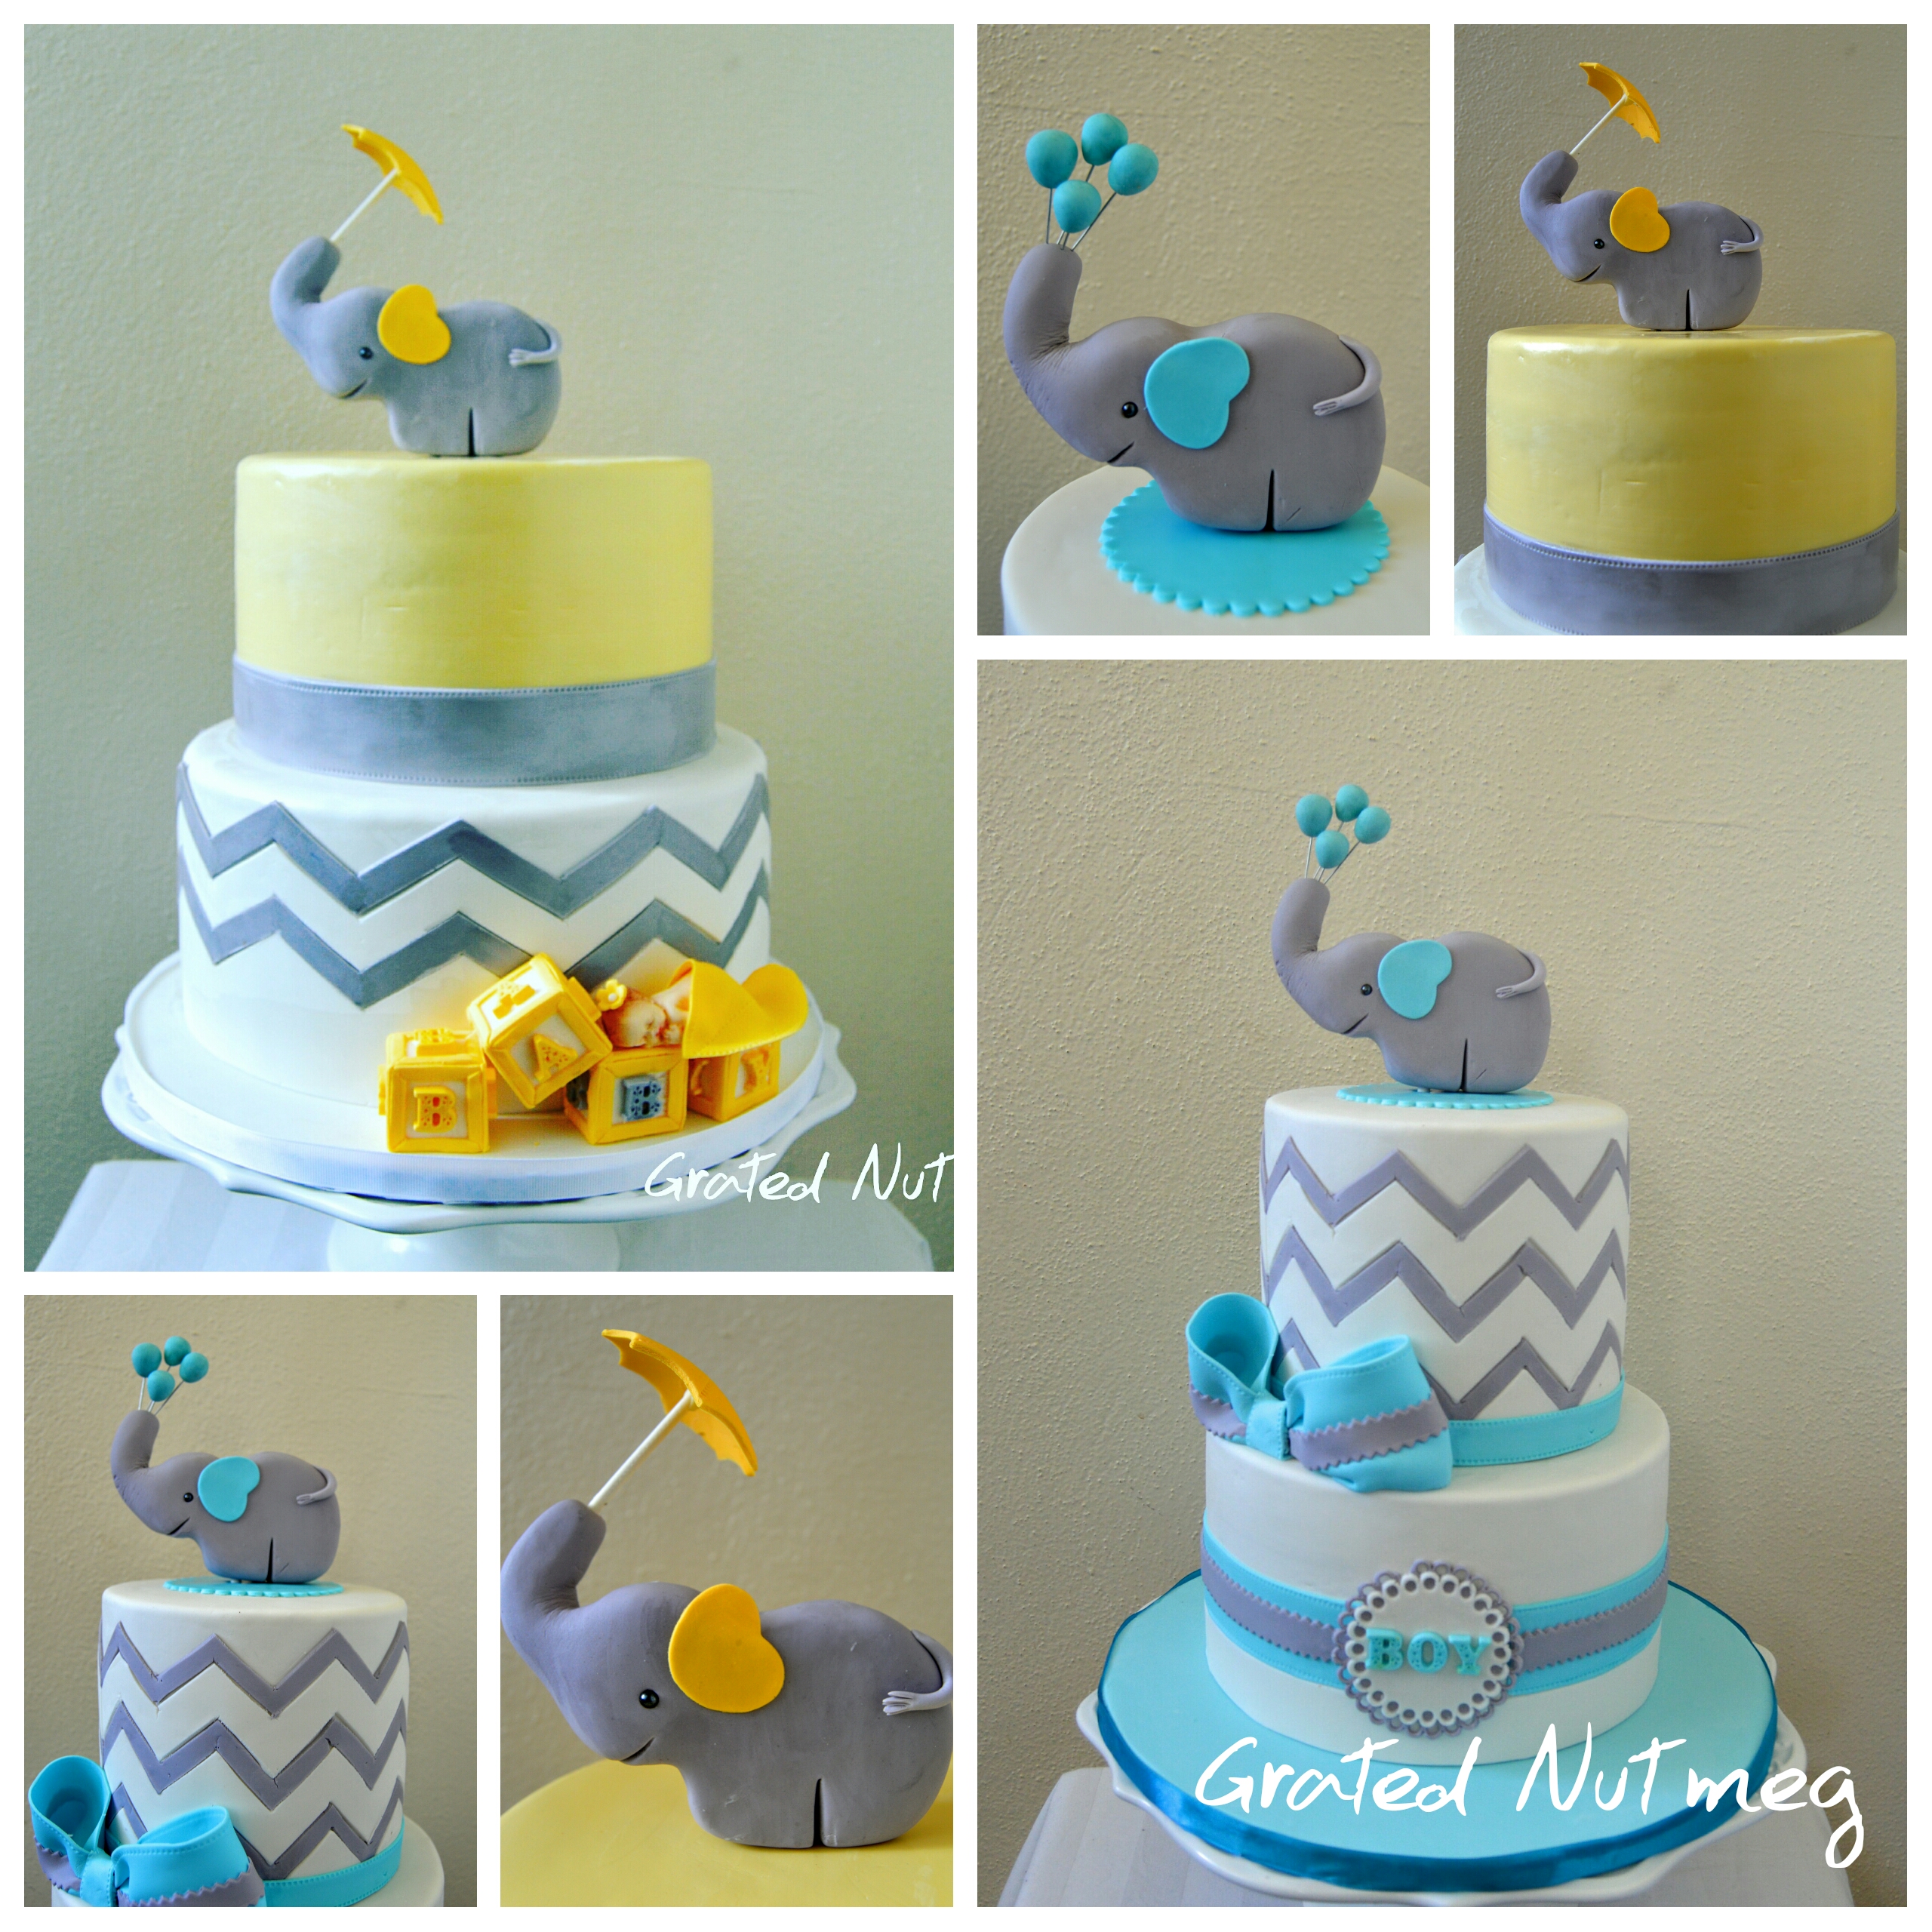 The Making of Chevron Baby Shower Cakes with Elephant – Grated